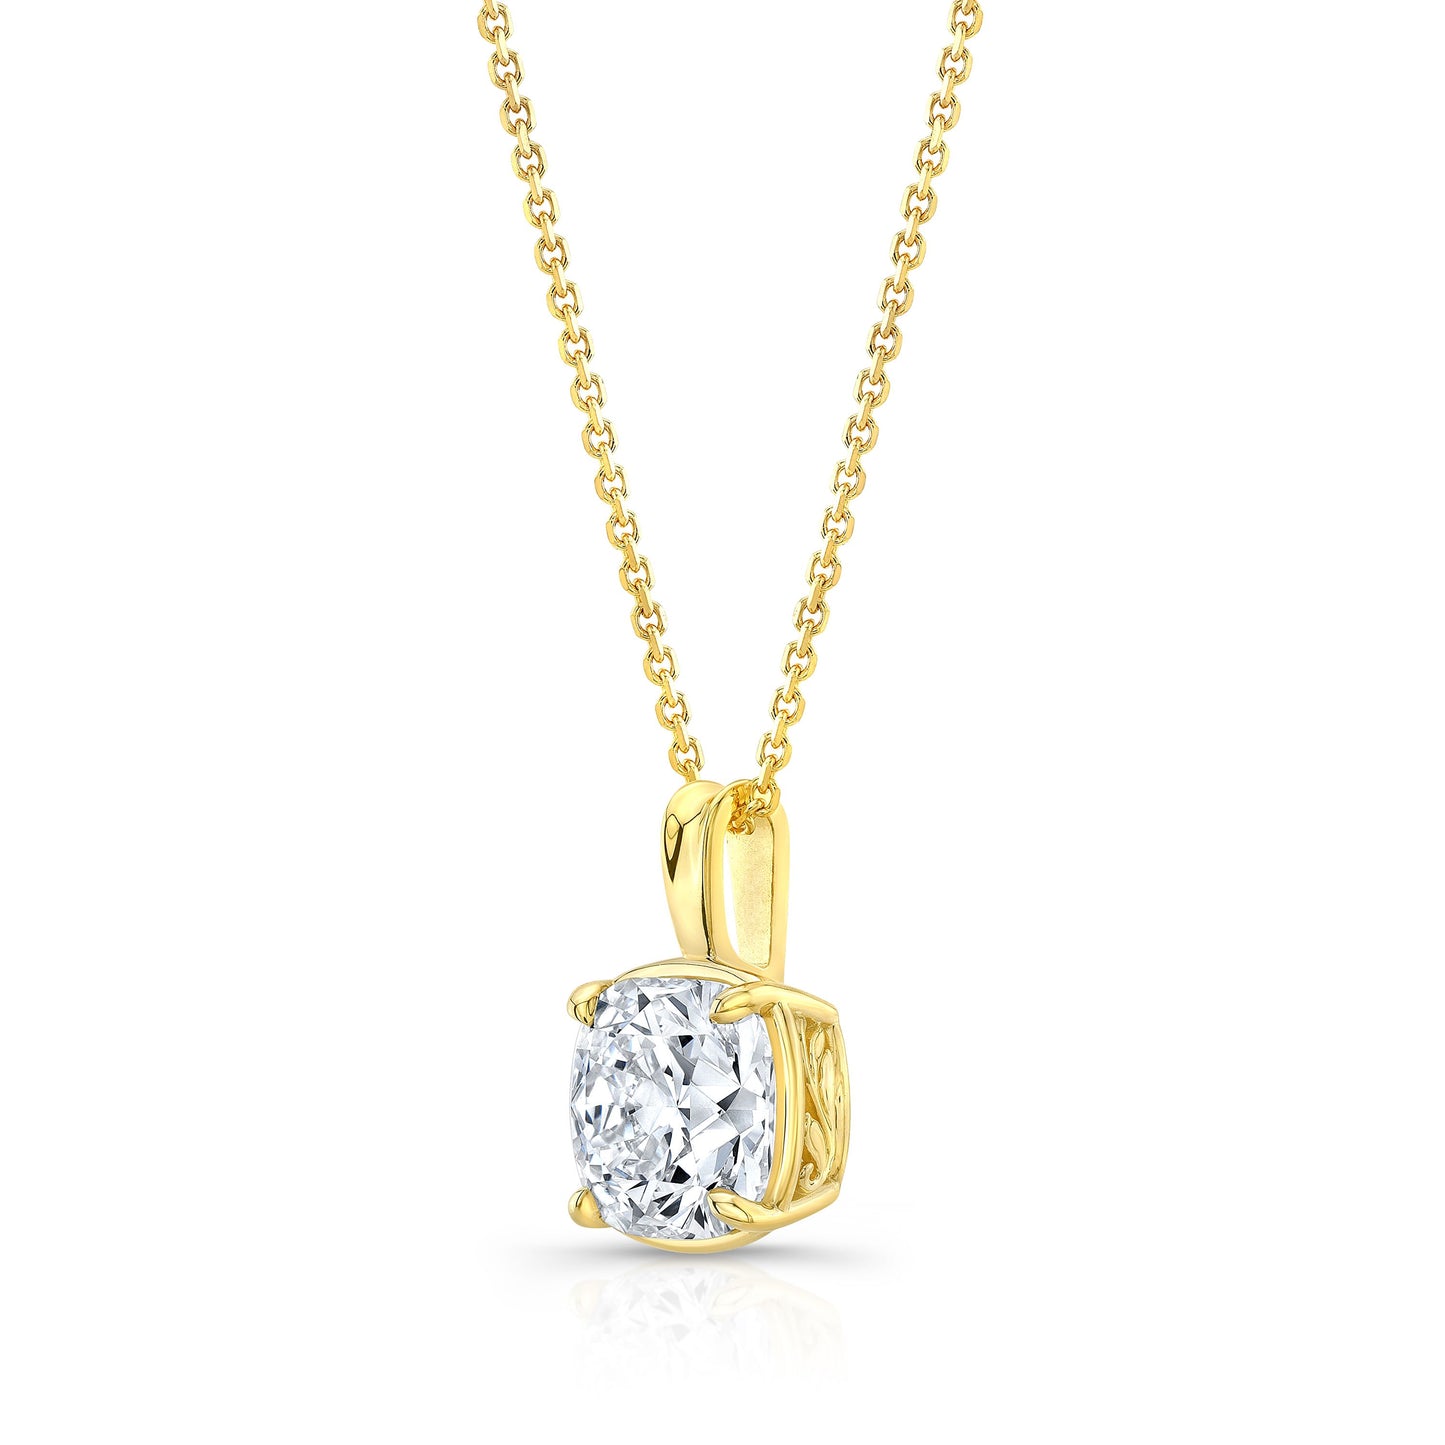 Cushion Diamond Solitaire Pendant In A 14k Yellow Gold 4-prong Leaf Scroll Setting, 2.24ct. T.w. (i, Vs1 Gia)